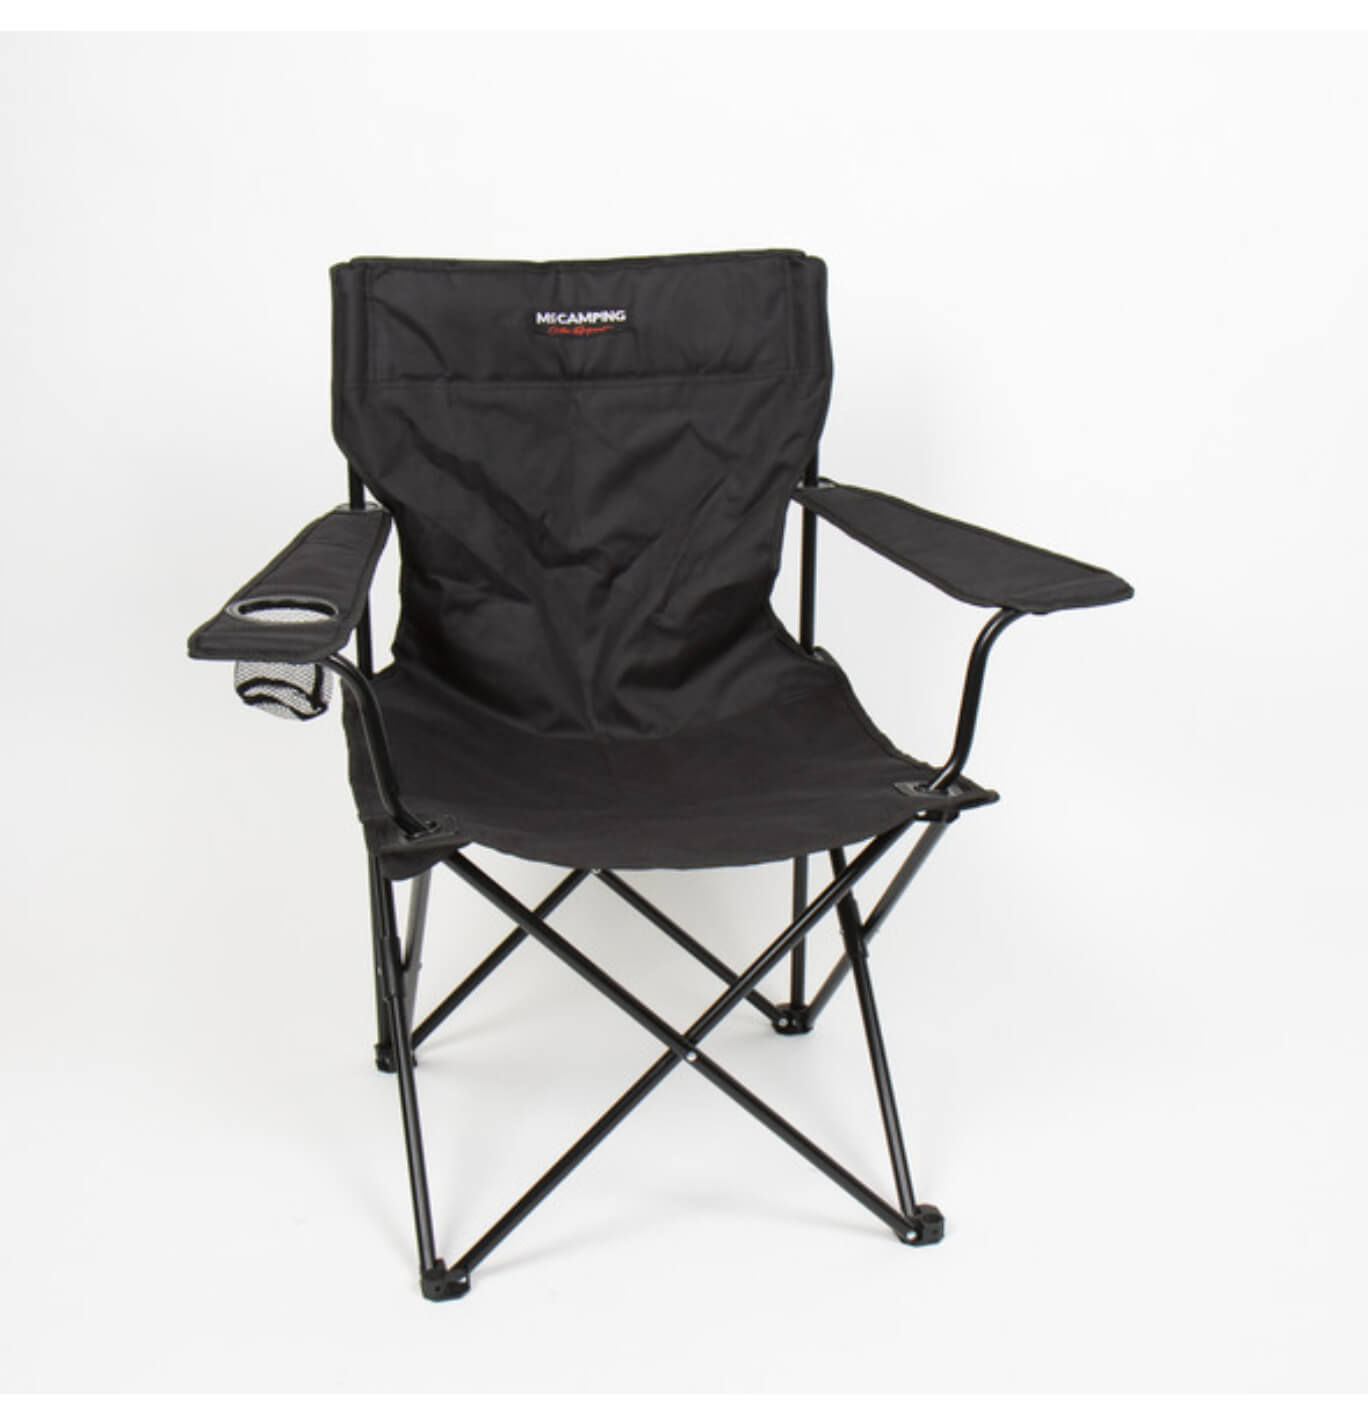 Reimo McCamping Mahalo Folding Outdoor Camping Chair Image